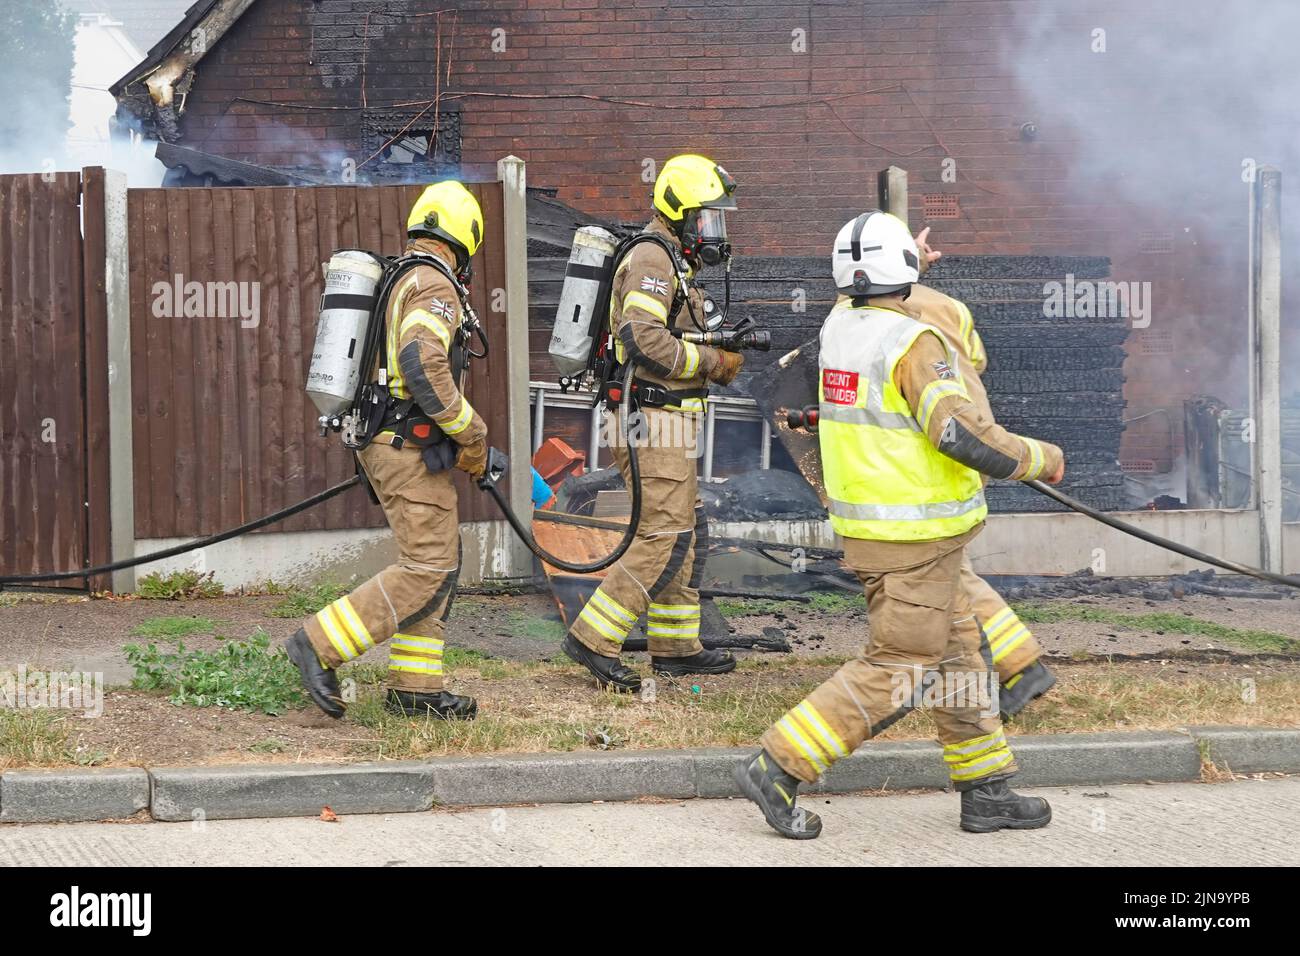 Two firefighter firemen in protective clothing wearing breathing apparatus equipment about to enter interior of smoldering house fire England UK Stock Photo